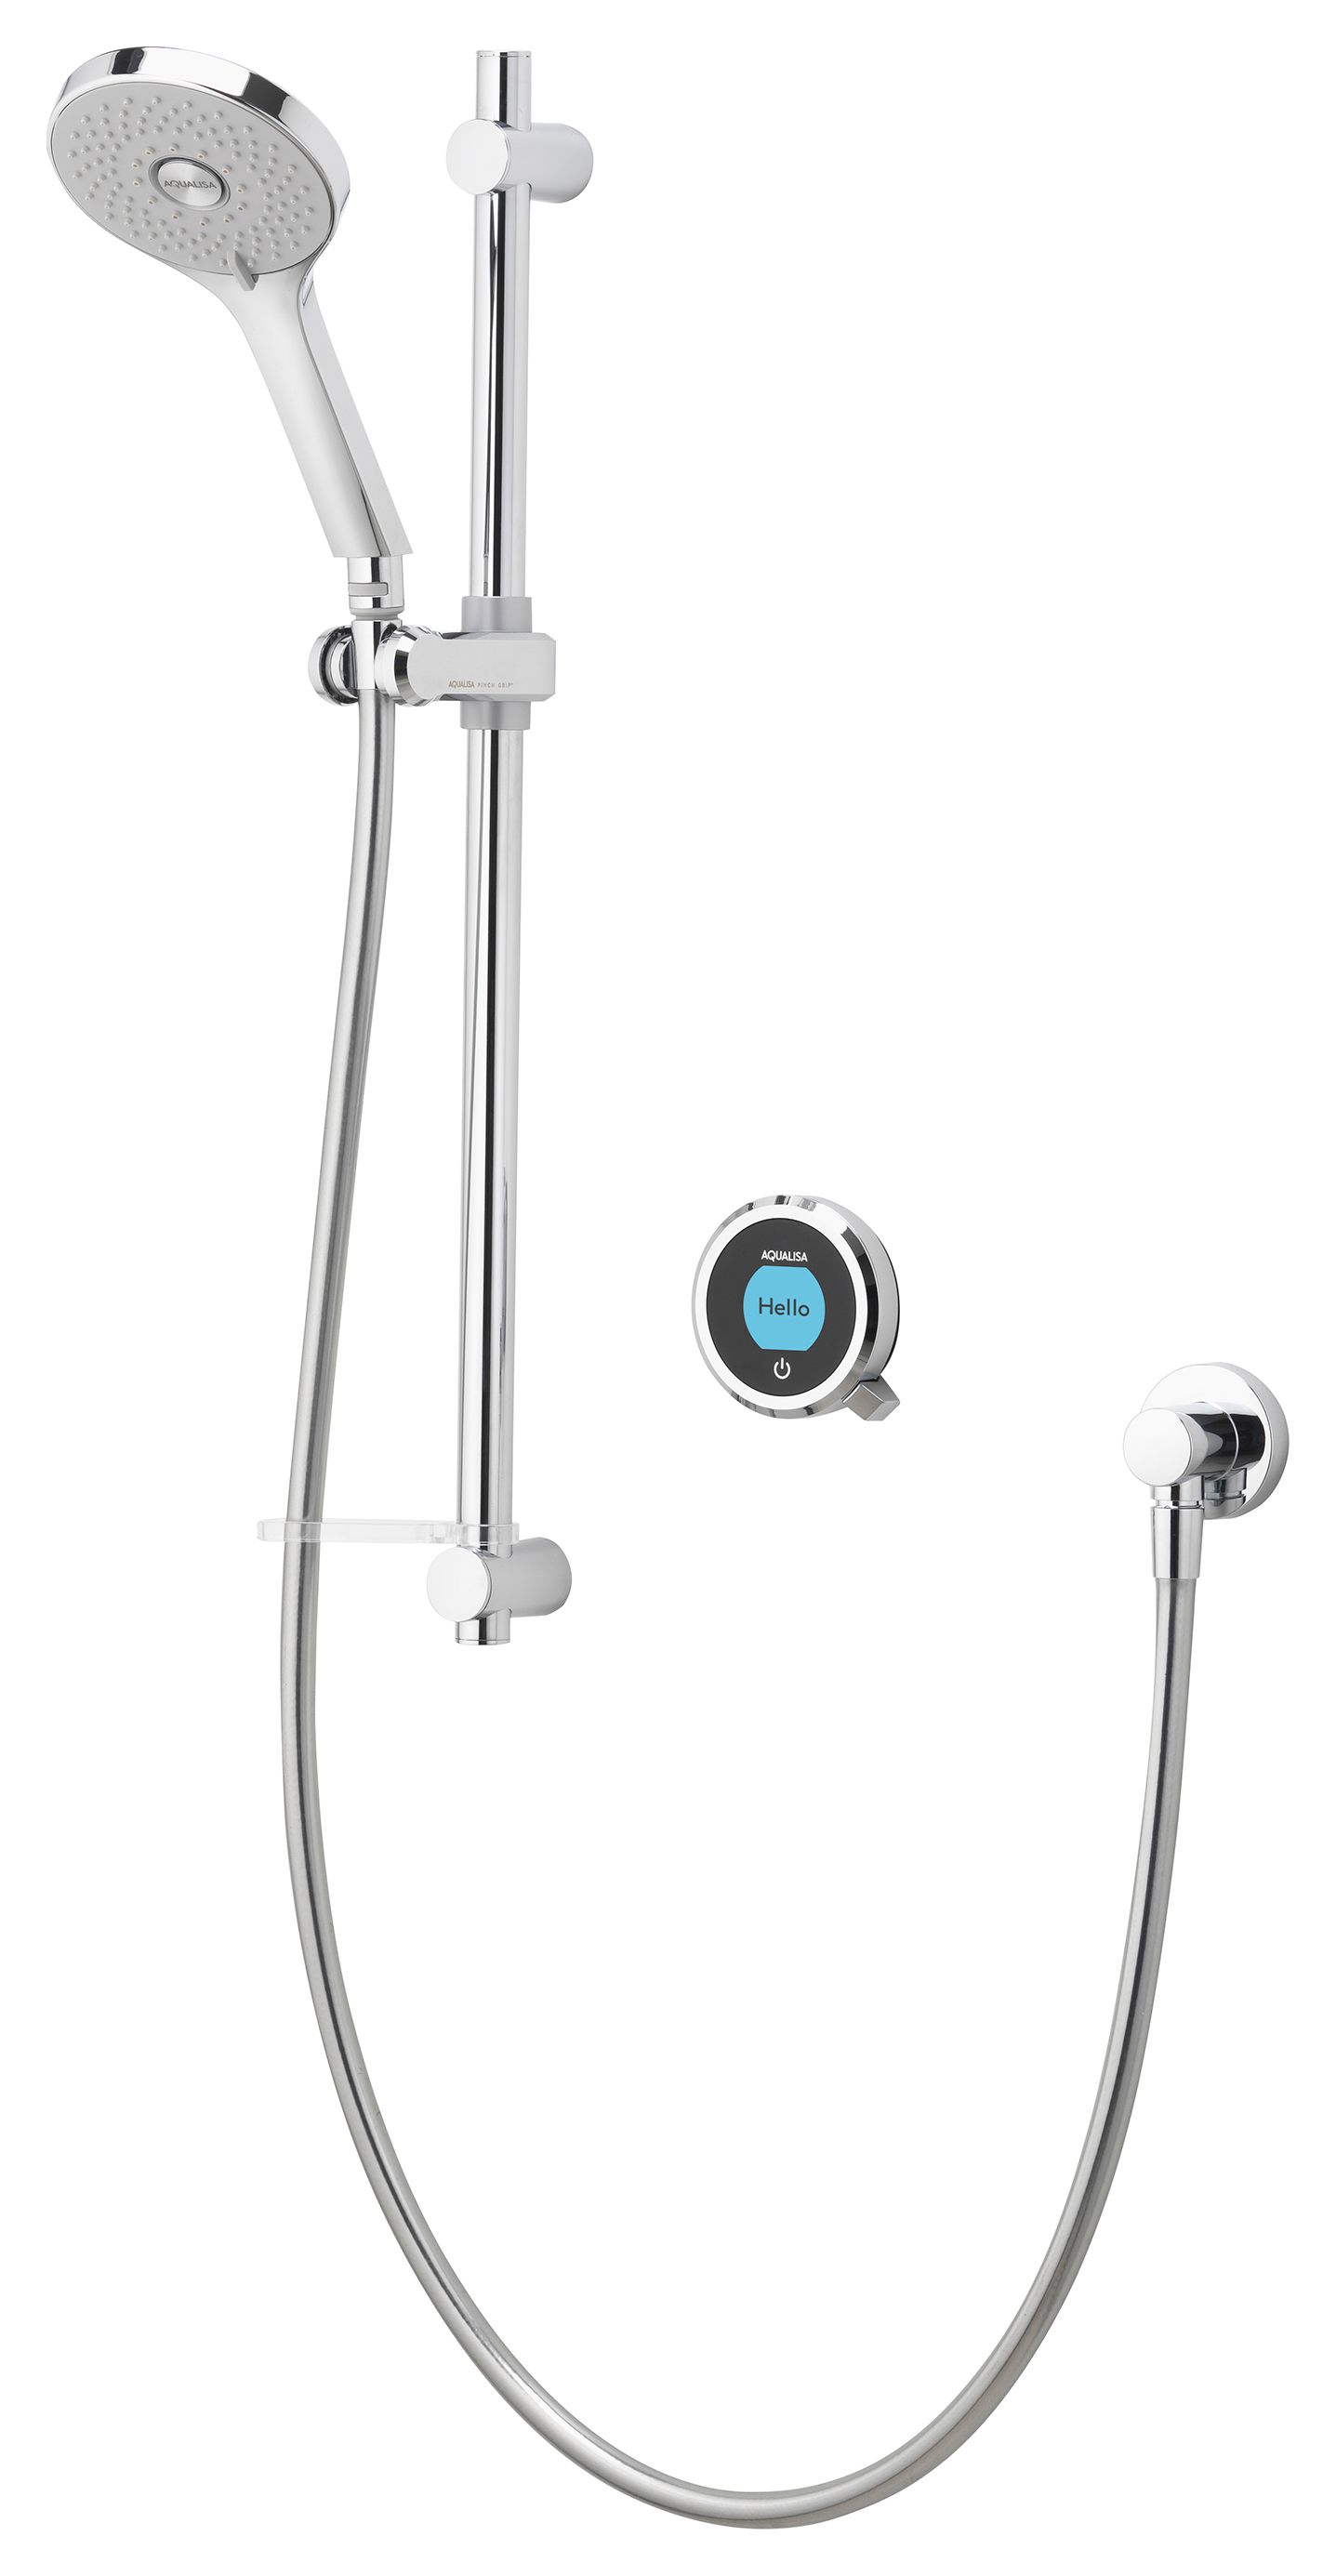 Aqualisa Optic Q Smart Concealed Gravity Pumped Shower with Adjustable Head